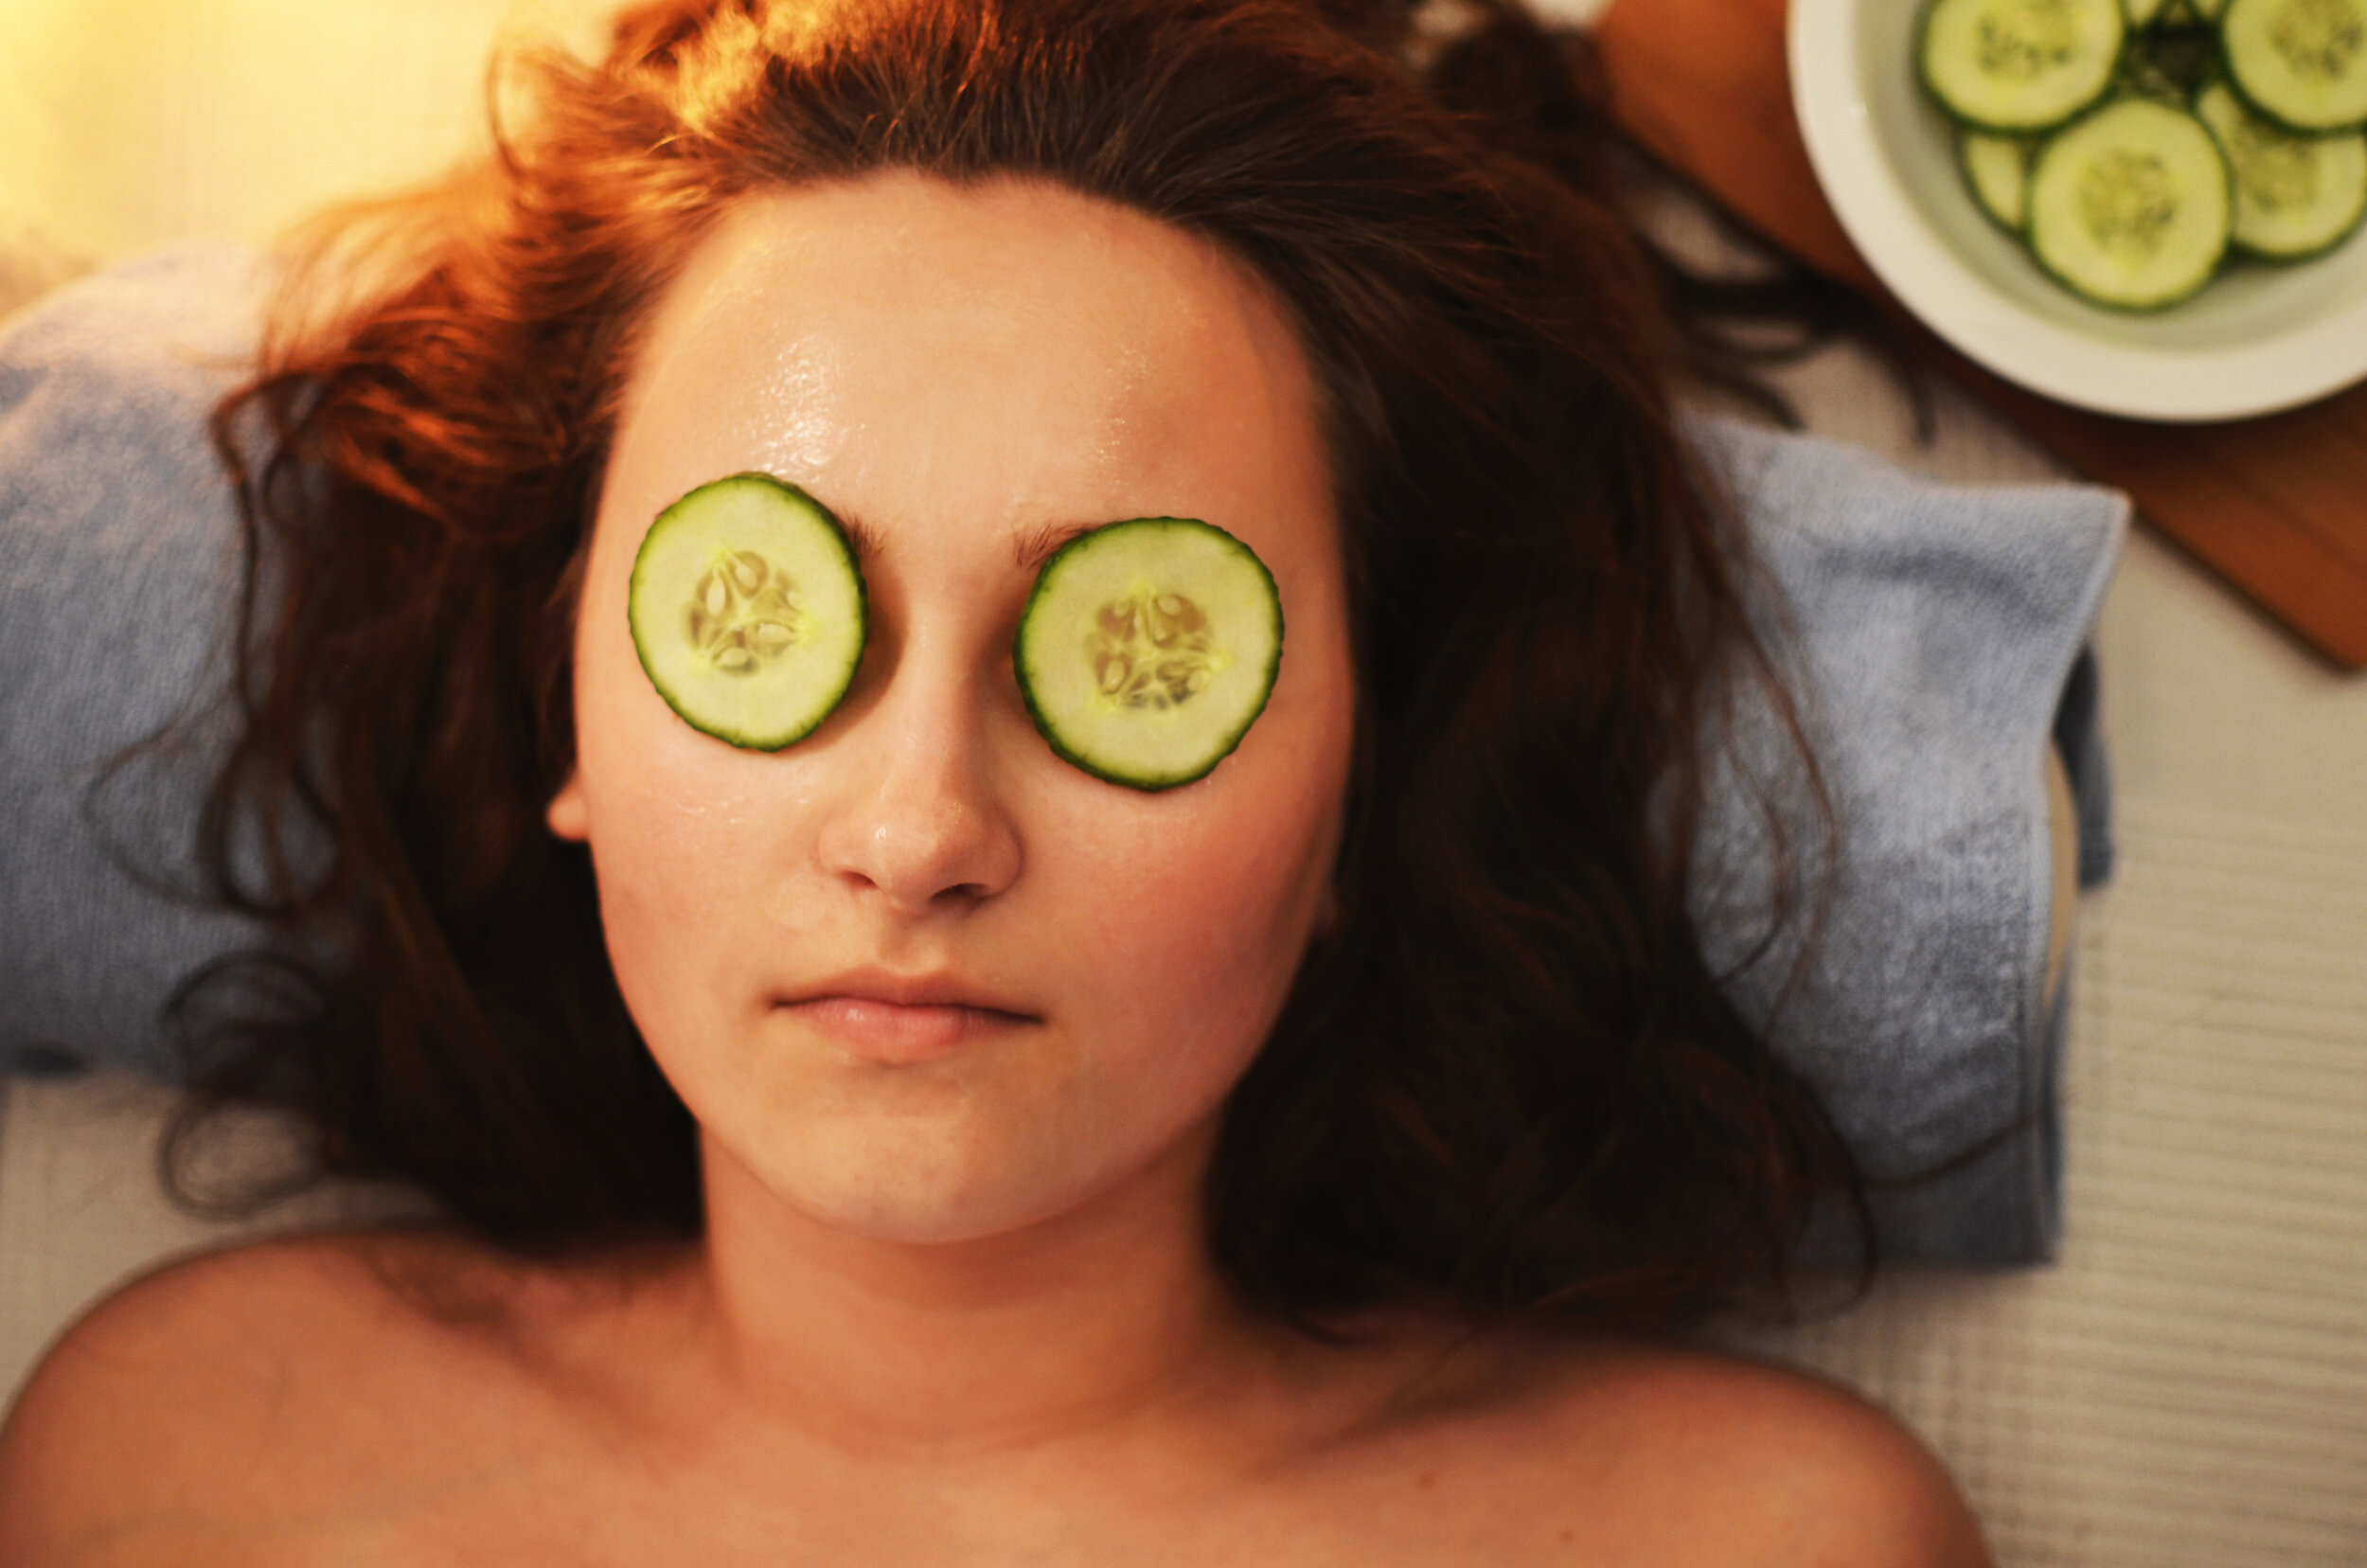 Canva - Woman Lying on White Textile With Sliced Cucumbers on Her Eyes.jpg